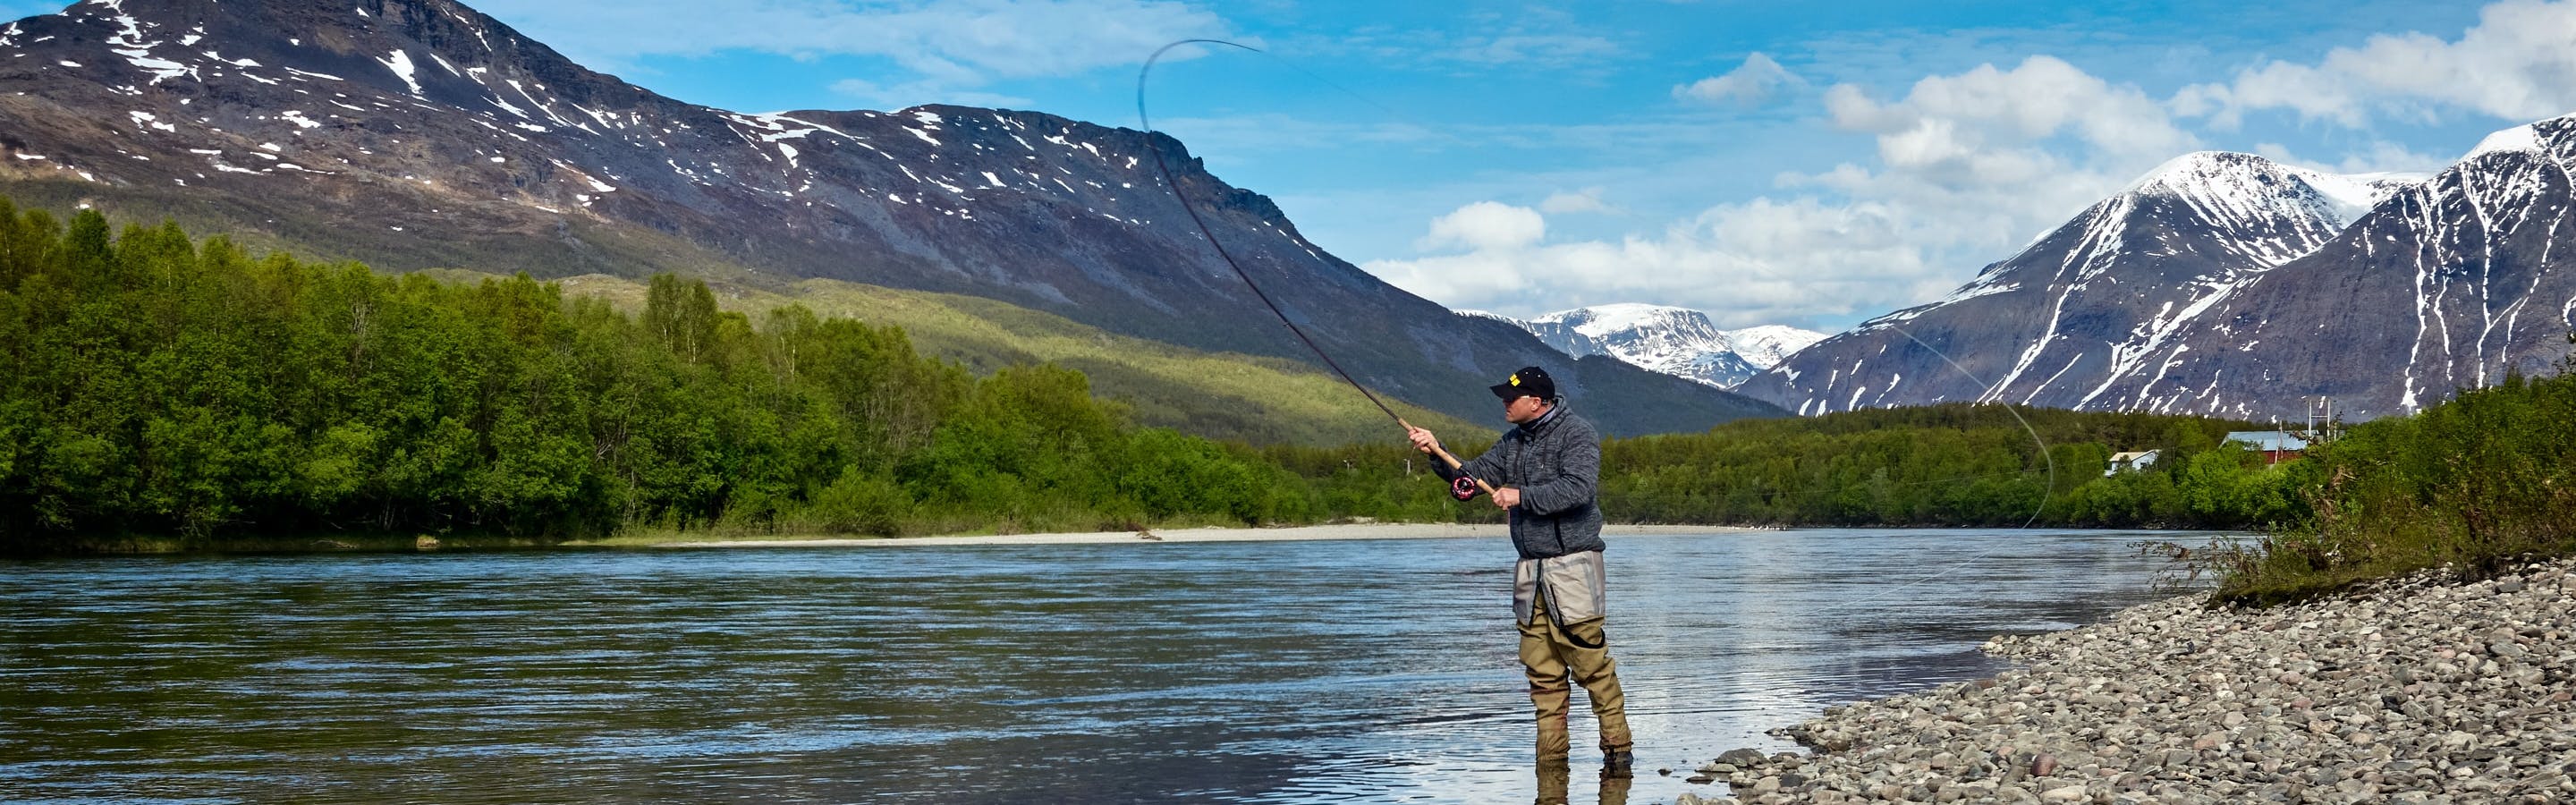 Fishing Dry Flies: The Gear, The Basics, & Presenting the Fly